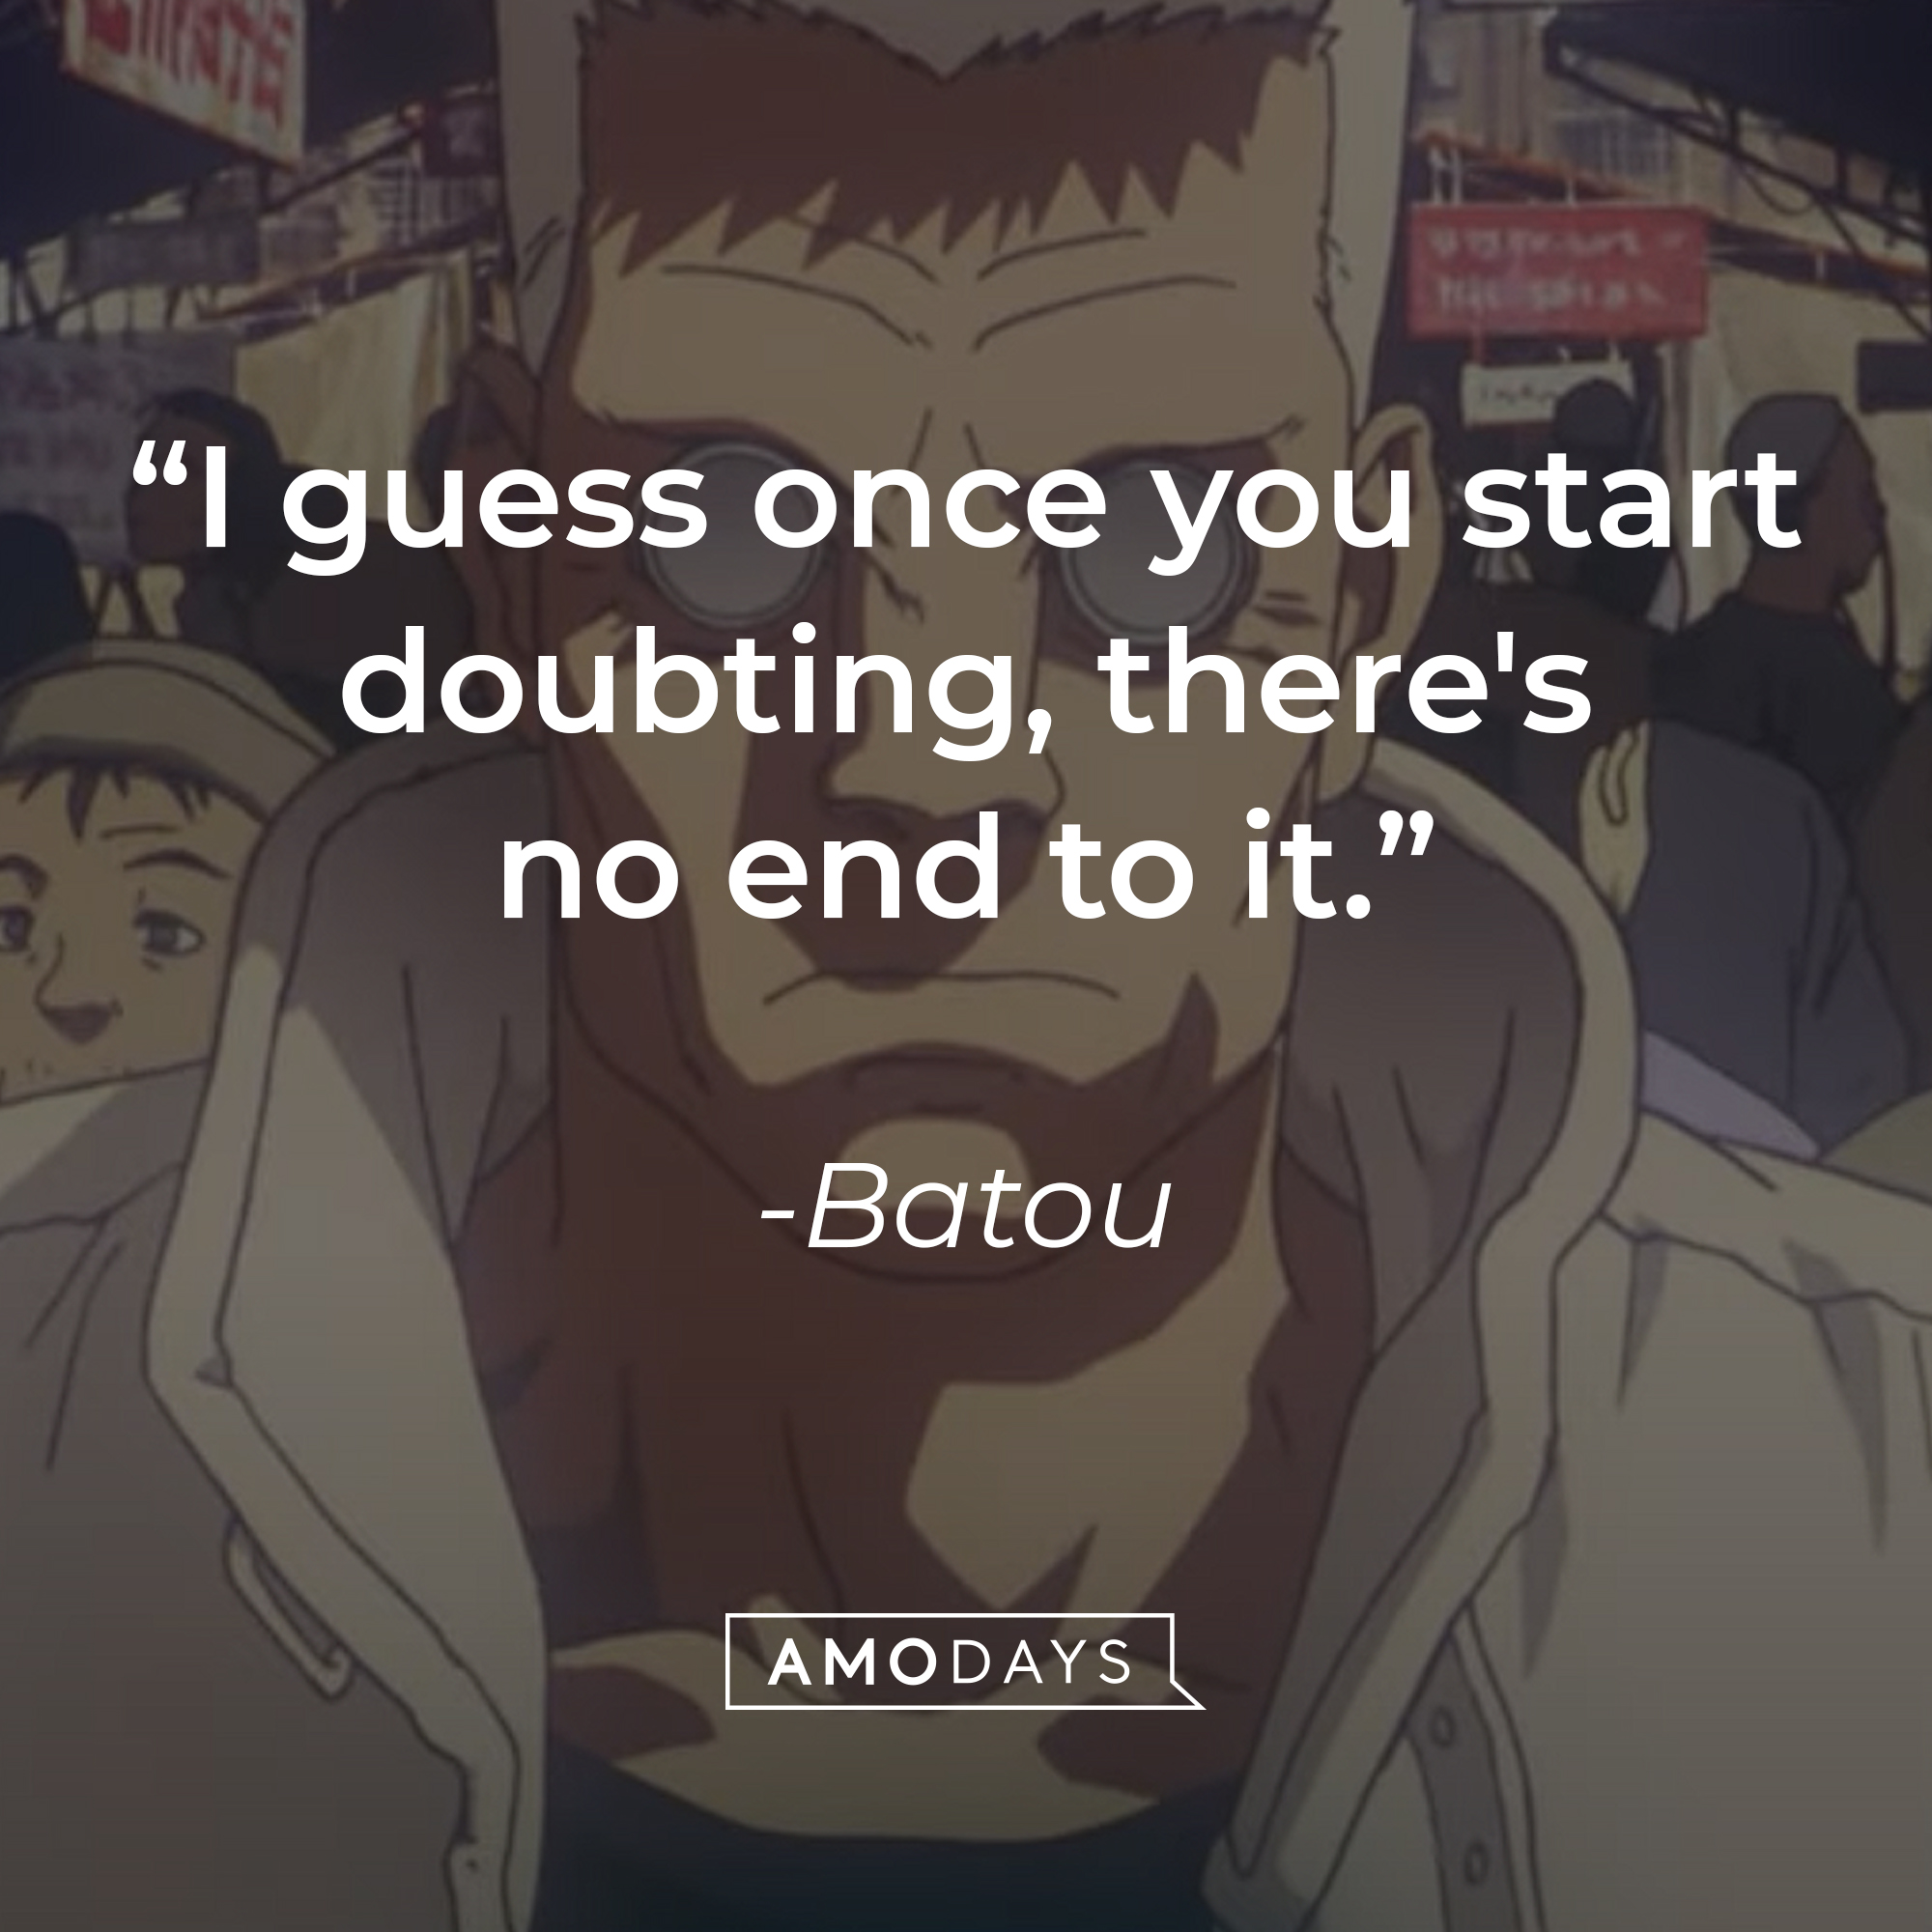 Batou with his quote: "I guess once you start doubting, there's no end to it." | Source: YouTube.com/LionsgateMovies